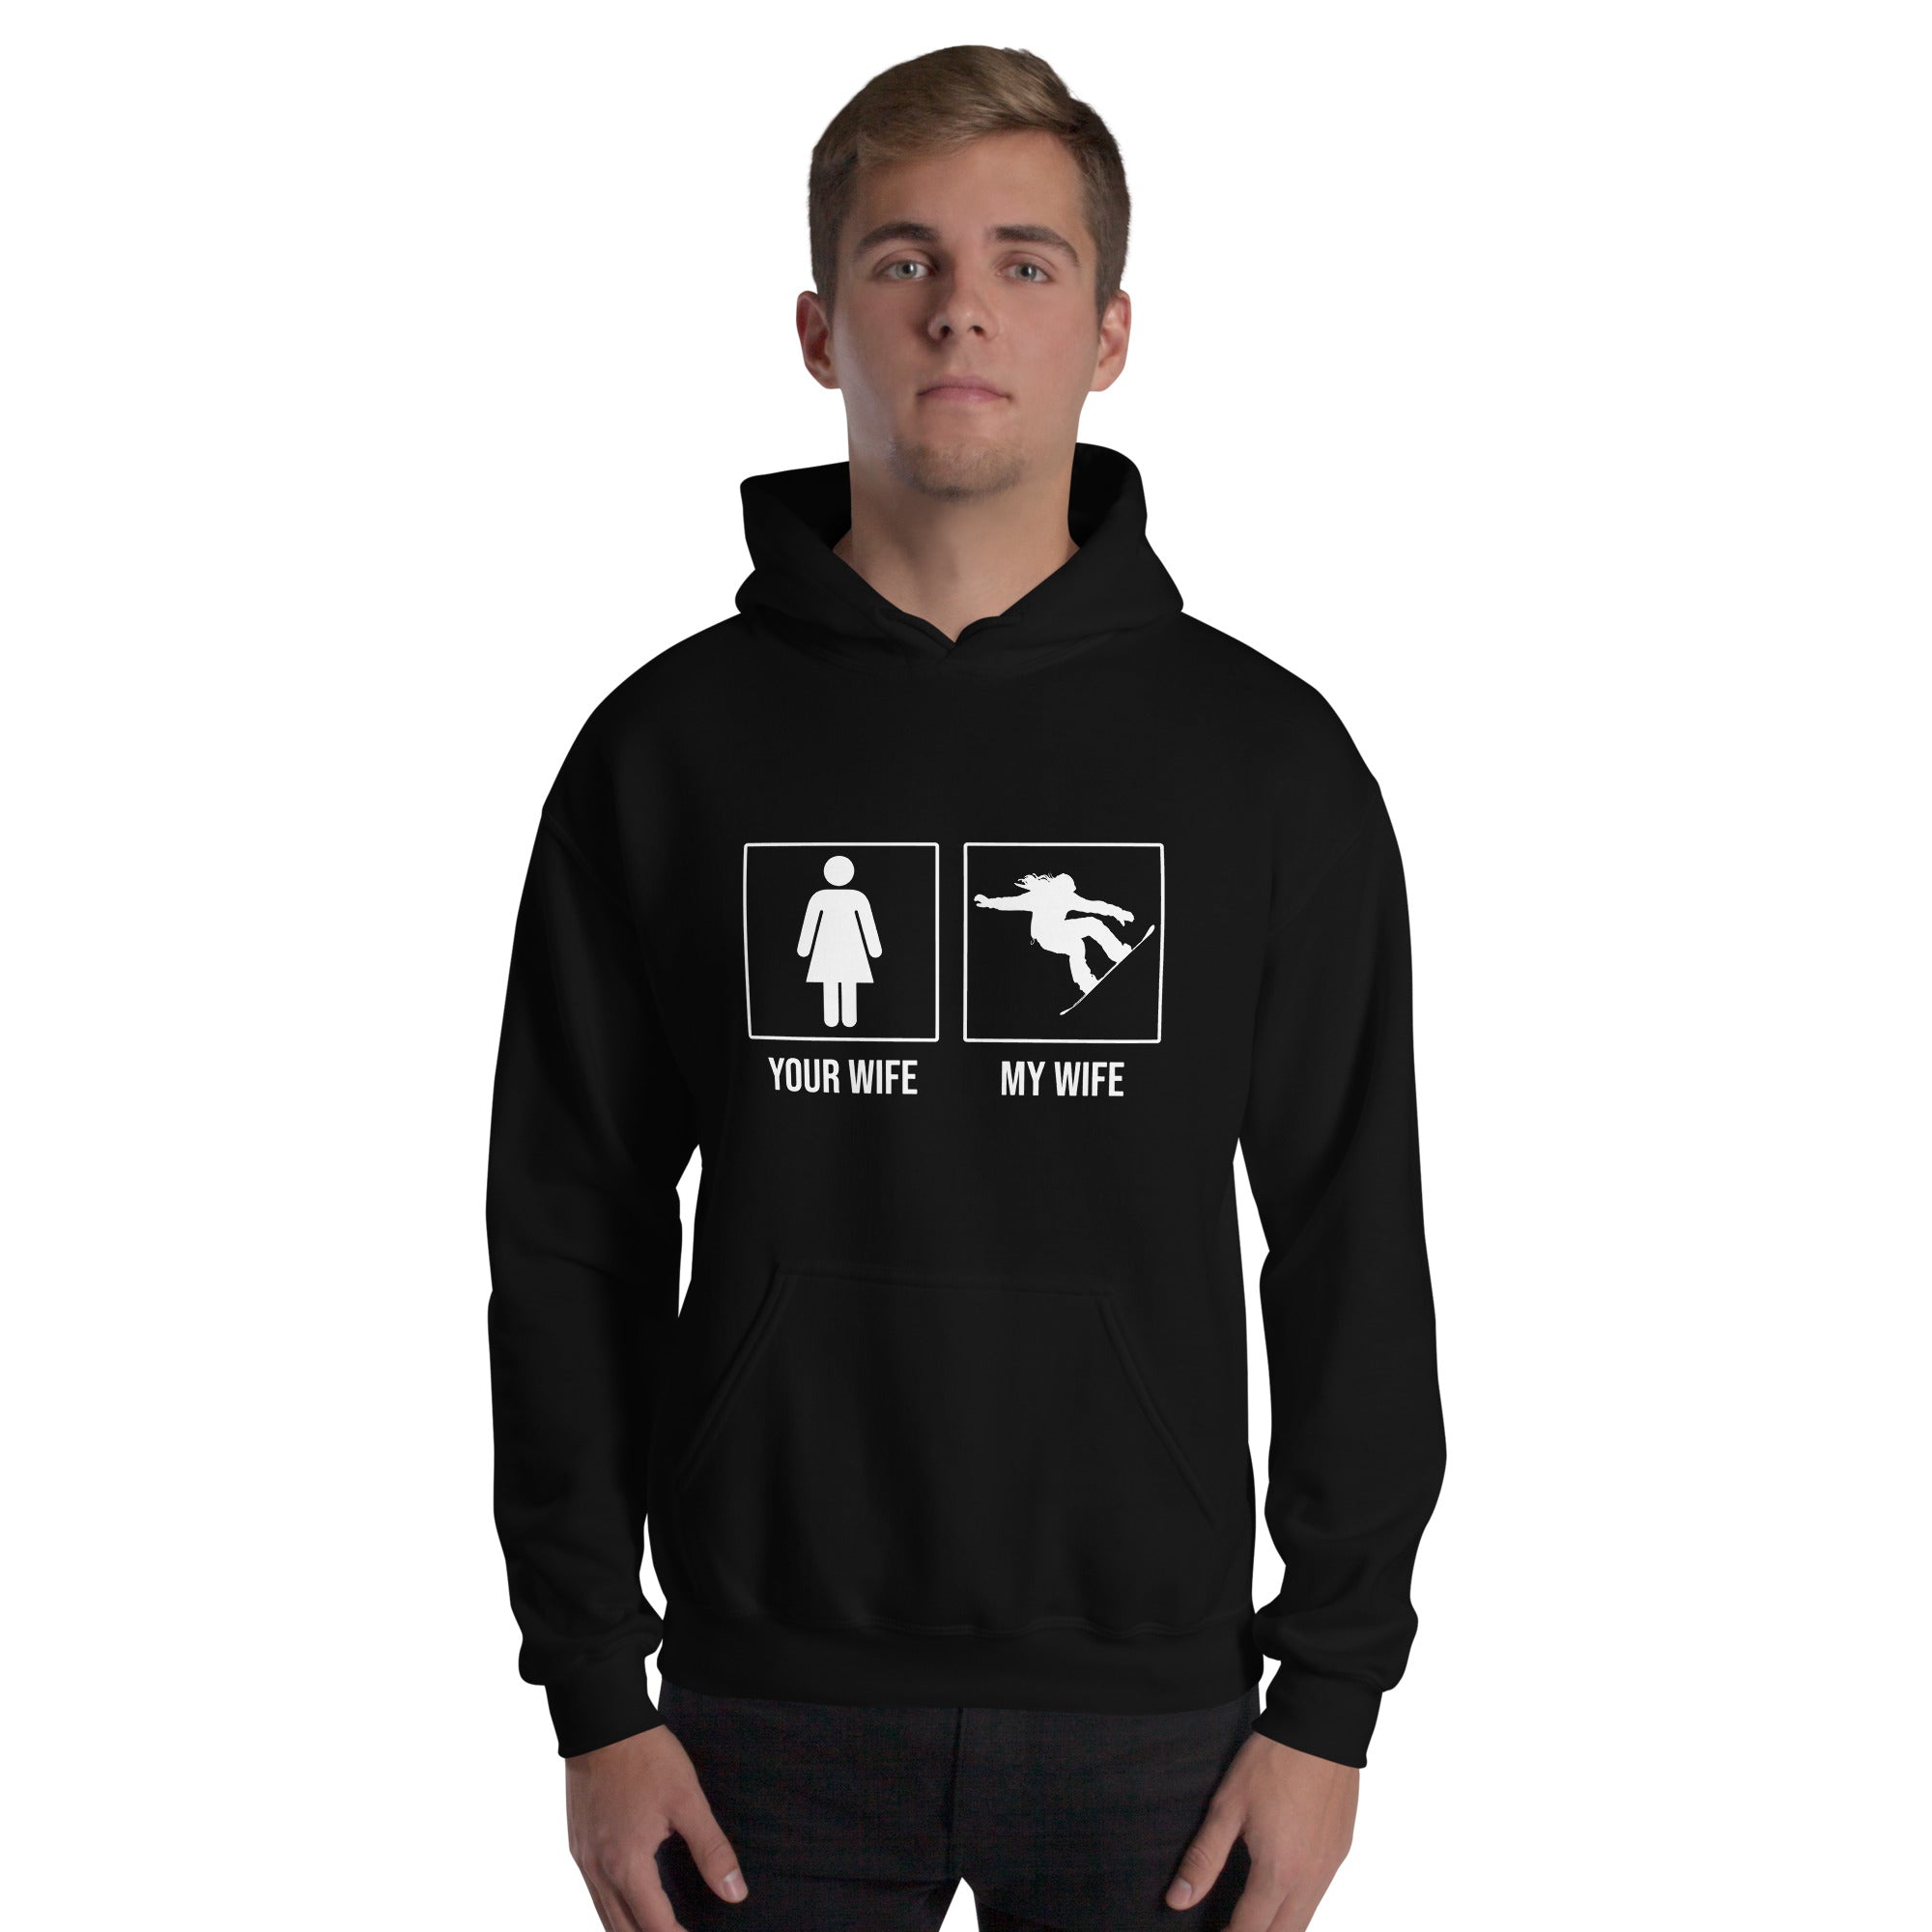 Your wife, my wife - snowboarding Unisex Hoodie